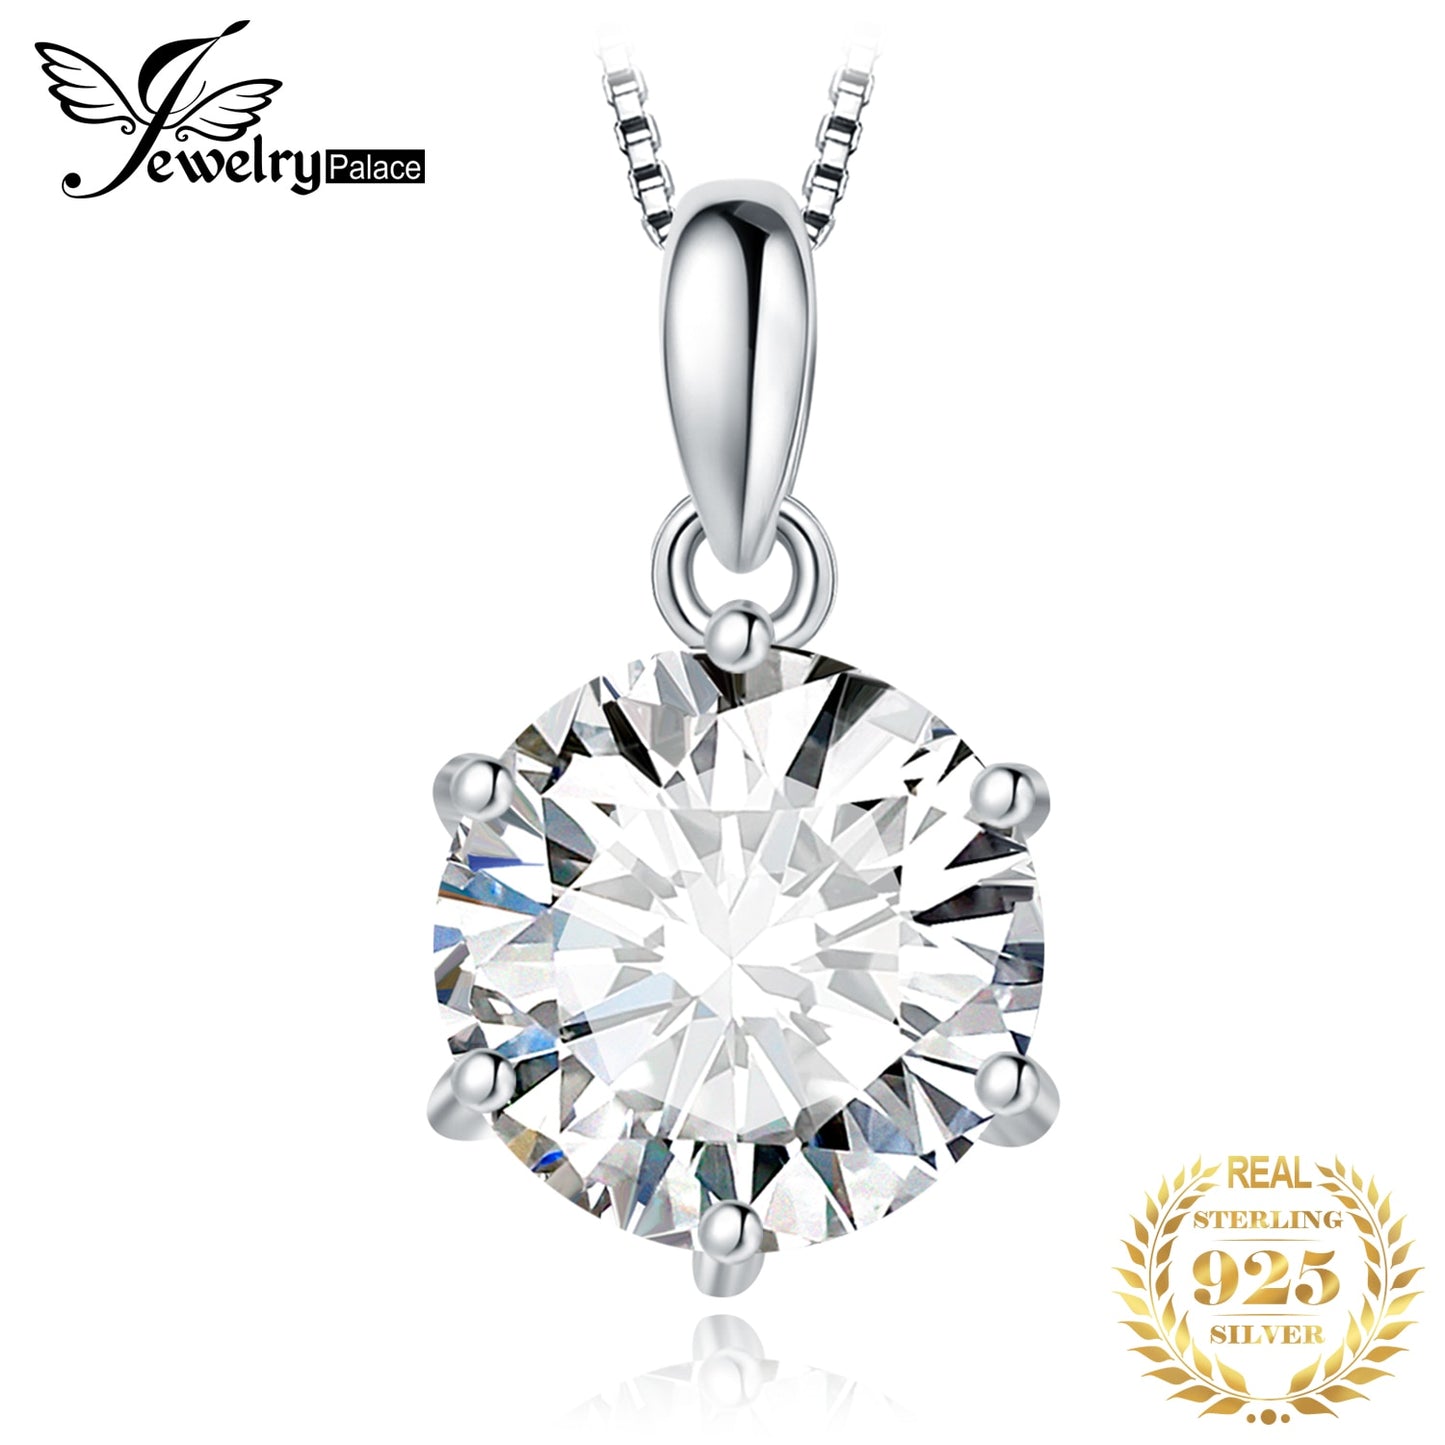 JewelryPalace Moissanite D Color 1ct 1.5ct 2ct 3ct Round 925 Sterling Silver Pendant Necklace for Woman No Chain